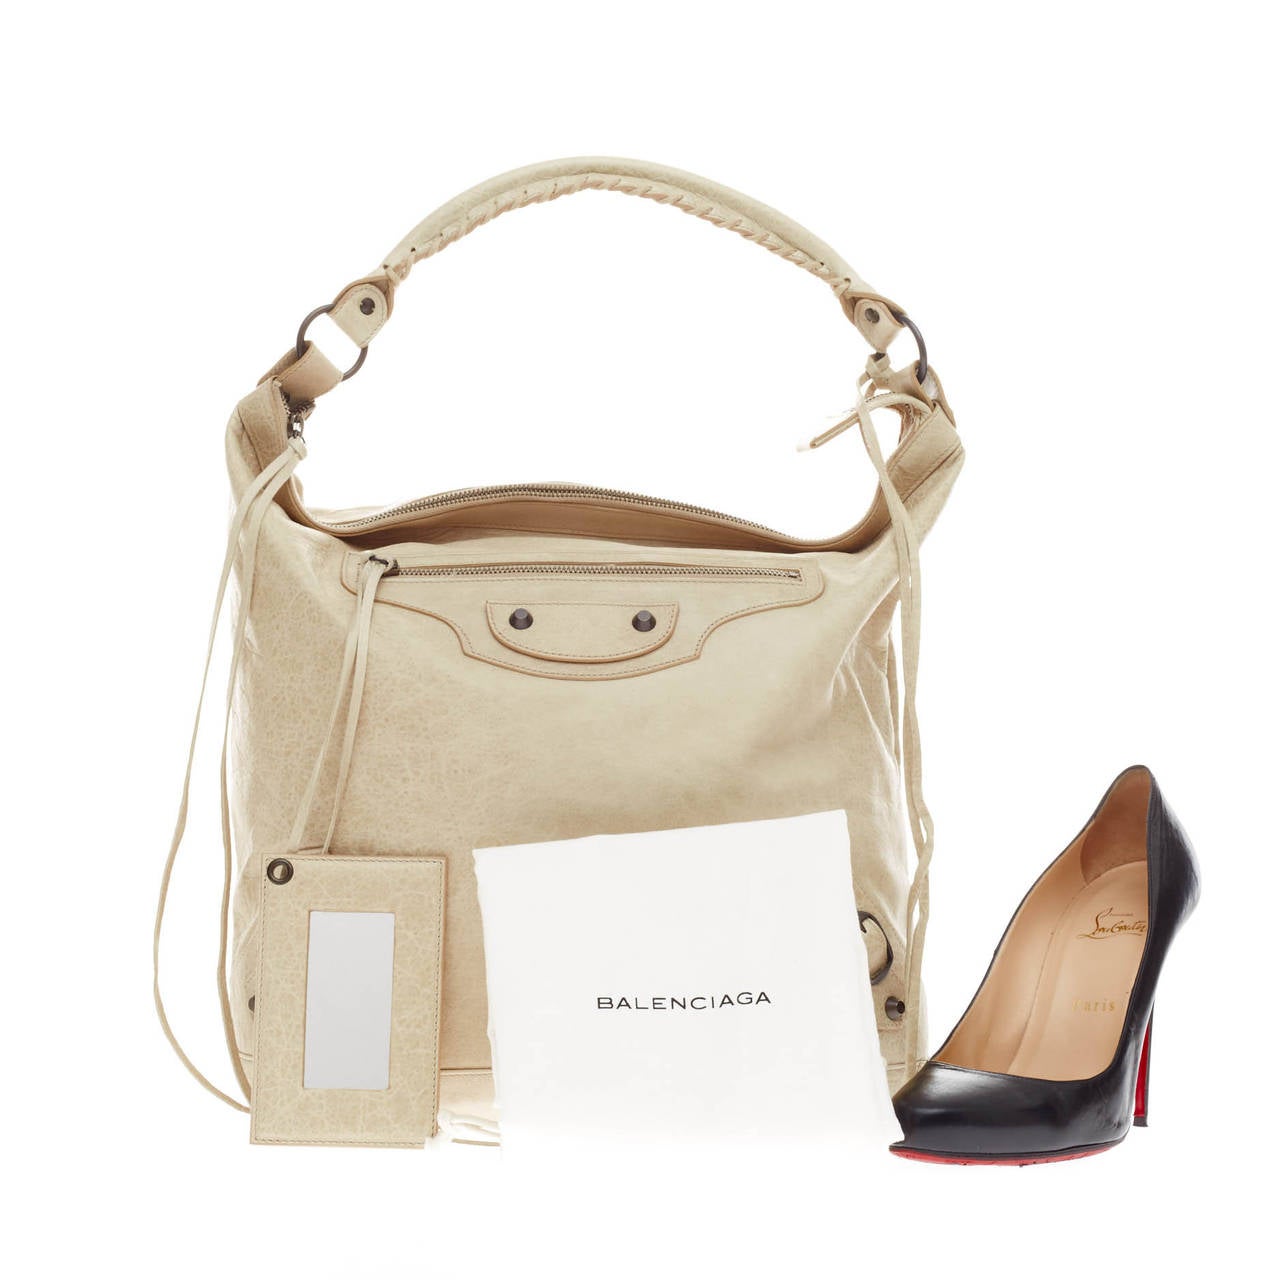 This authentic  Balenciaga Day Hobo Classic Studs Leather is a go-to essential that fits everyday essentials. Crafted in ivory off-white leather, this spacious hobo is accented with an intertwined braided leather top handle, long fringes on front